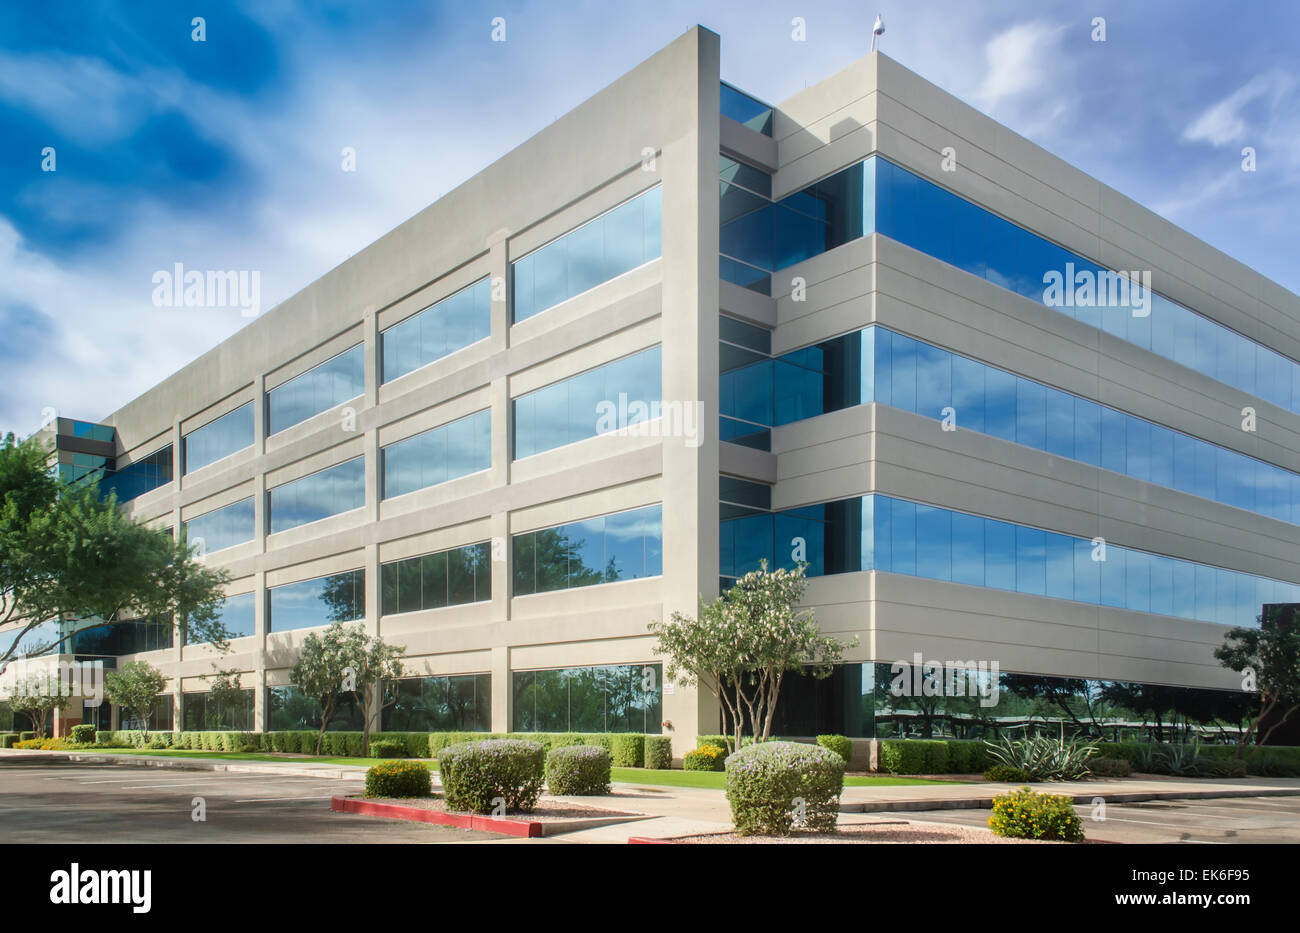 Stylized altered generic corporate modern office building Stock Photo